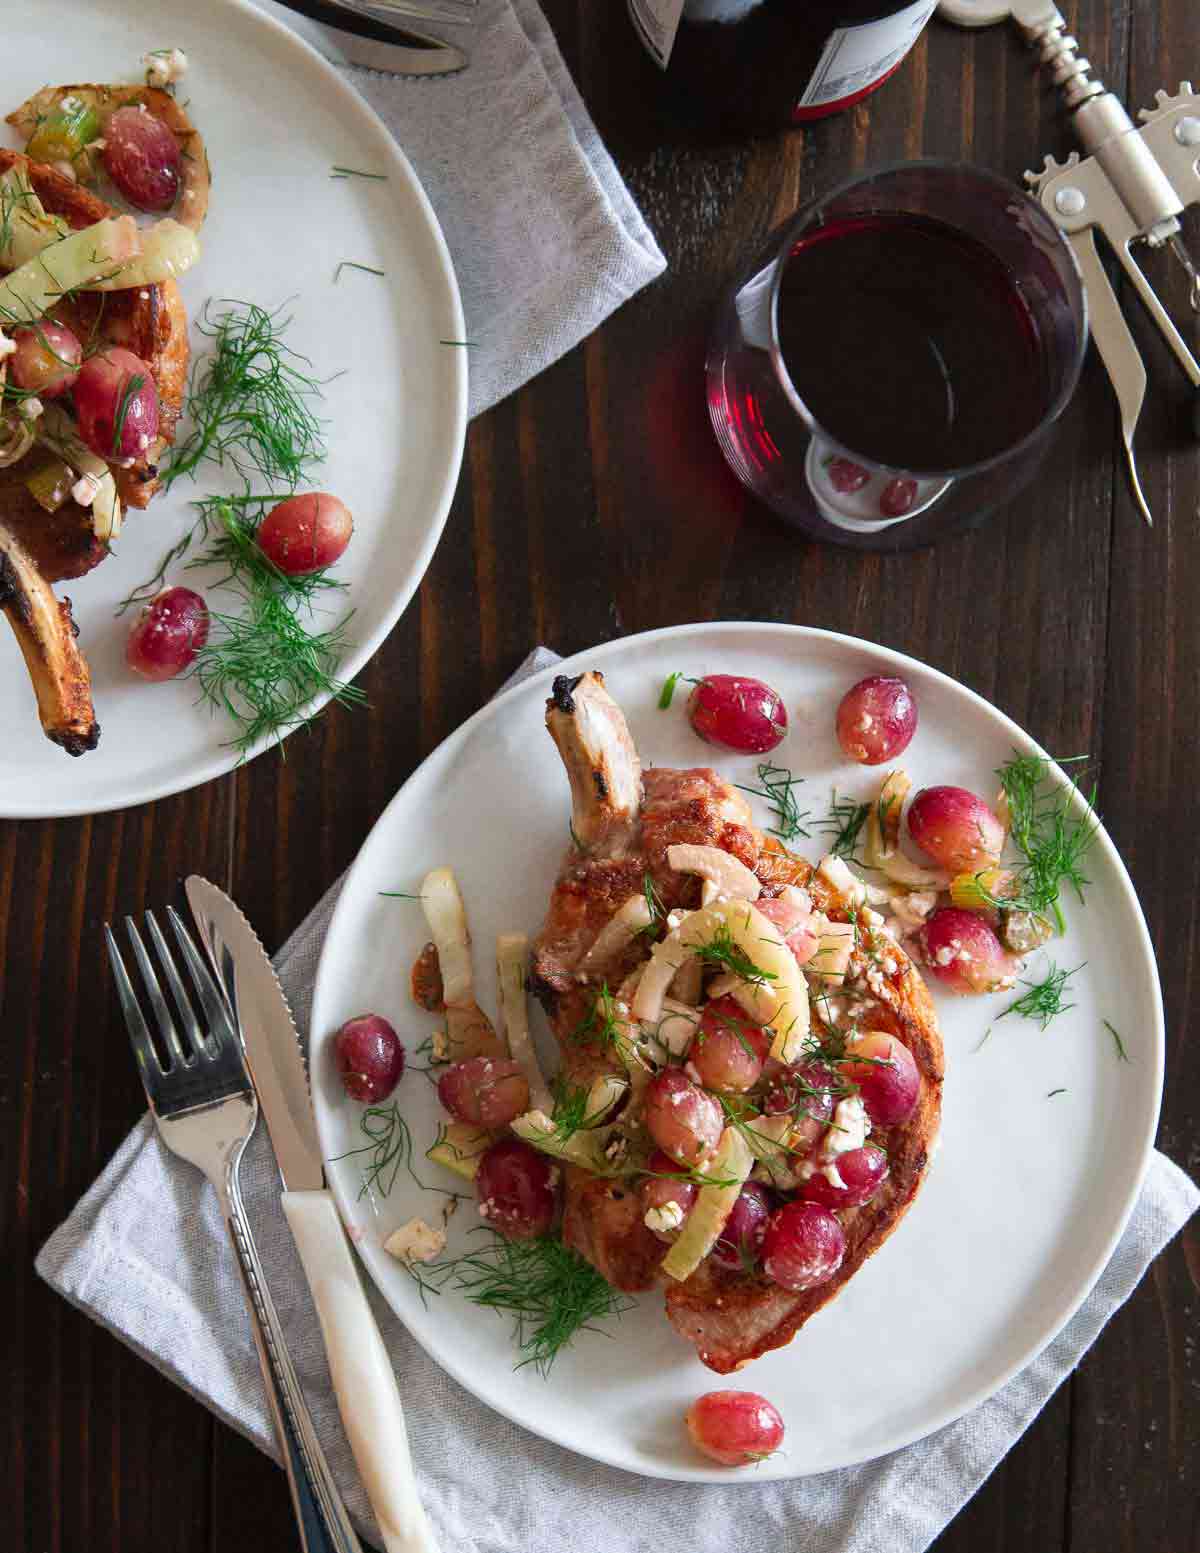 Grilled pork chops with grilled fennel and grapes is an easy and elegant meal made entirely on the grill.